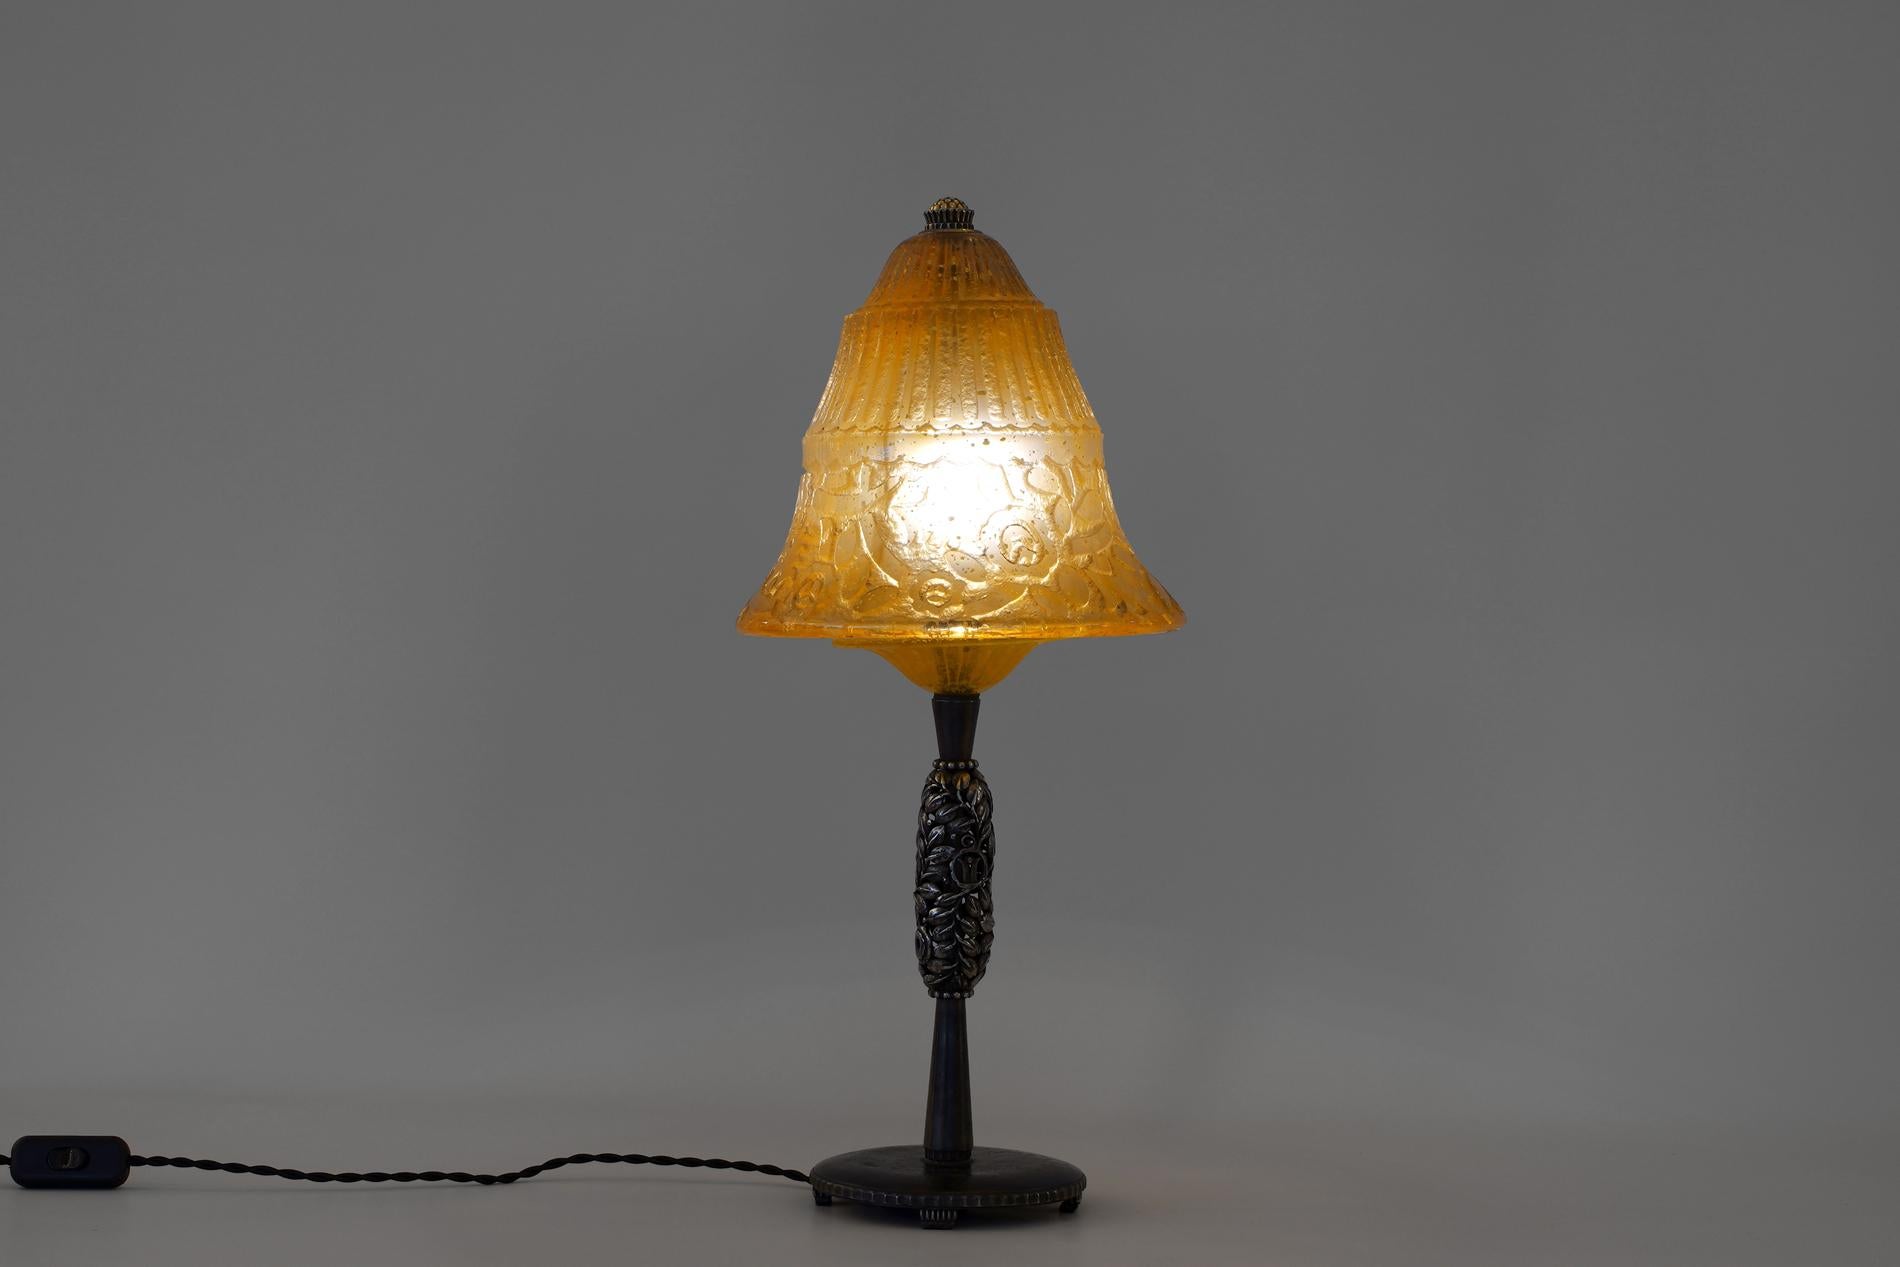 Exceptional and really rare french art deco table lamp in wrought iron by Edgar Brandt, signed on the base. The glass was made by Daum and the particularity is to be incrusted with tiny gold glitter.

For information, we have two of them with a